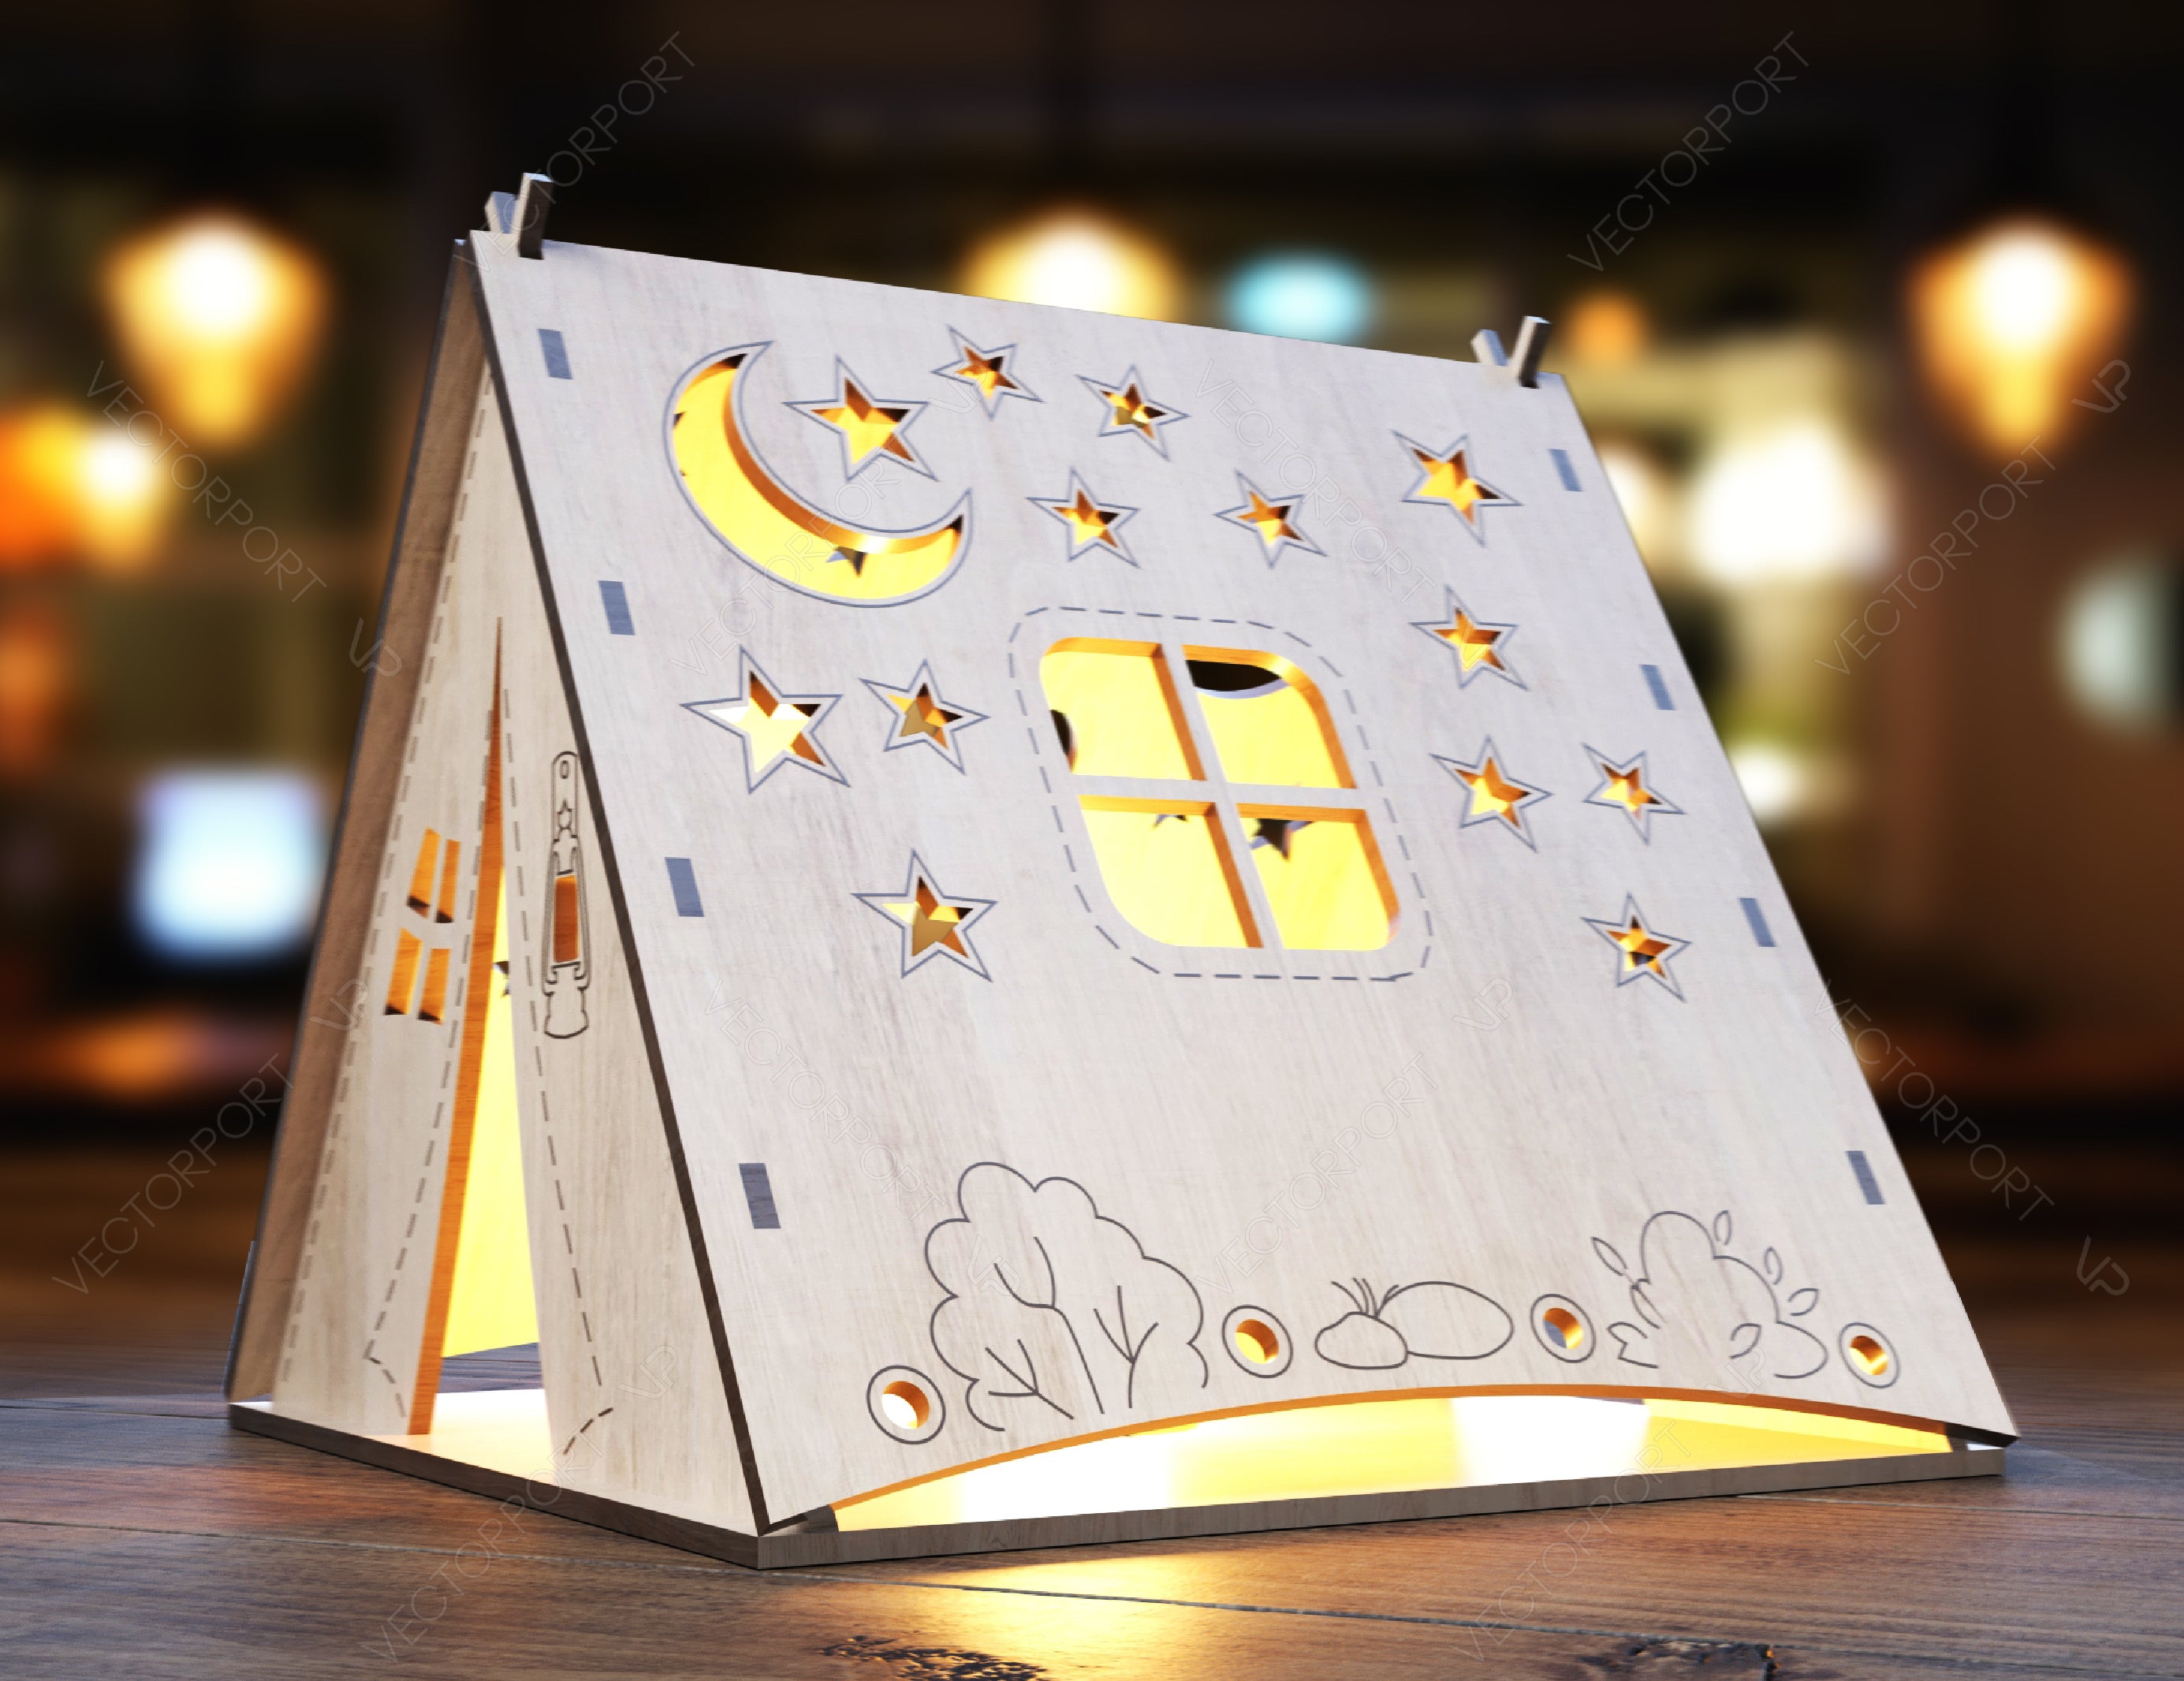 Laser Cut Wooden Tent Shape Night Light Lamp Mdf 3D Puzzle Laser Cutting Camping Tent Home Lampshade Table Candle Holder Tea light | SVG, DXF, AI |#106|